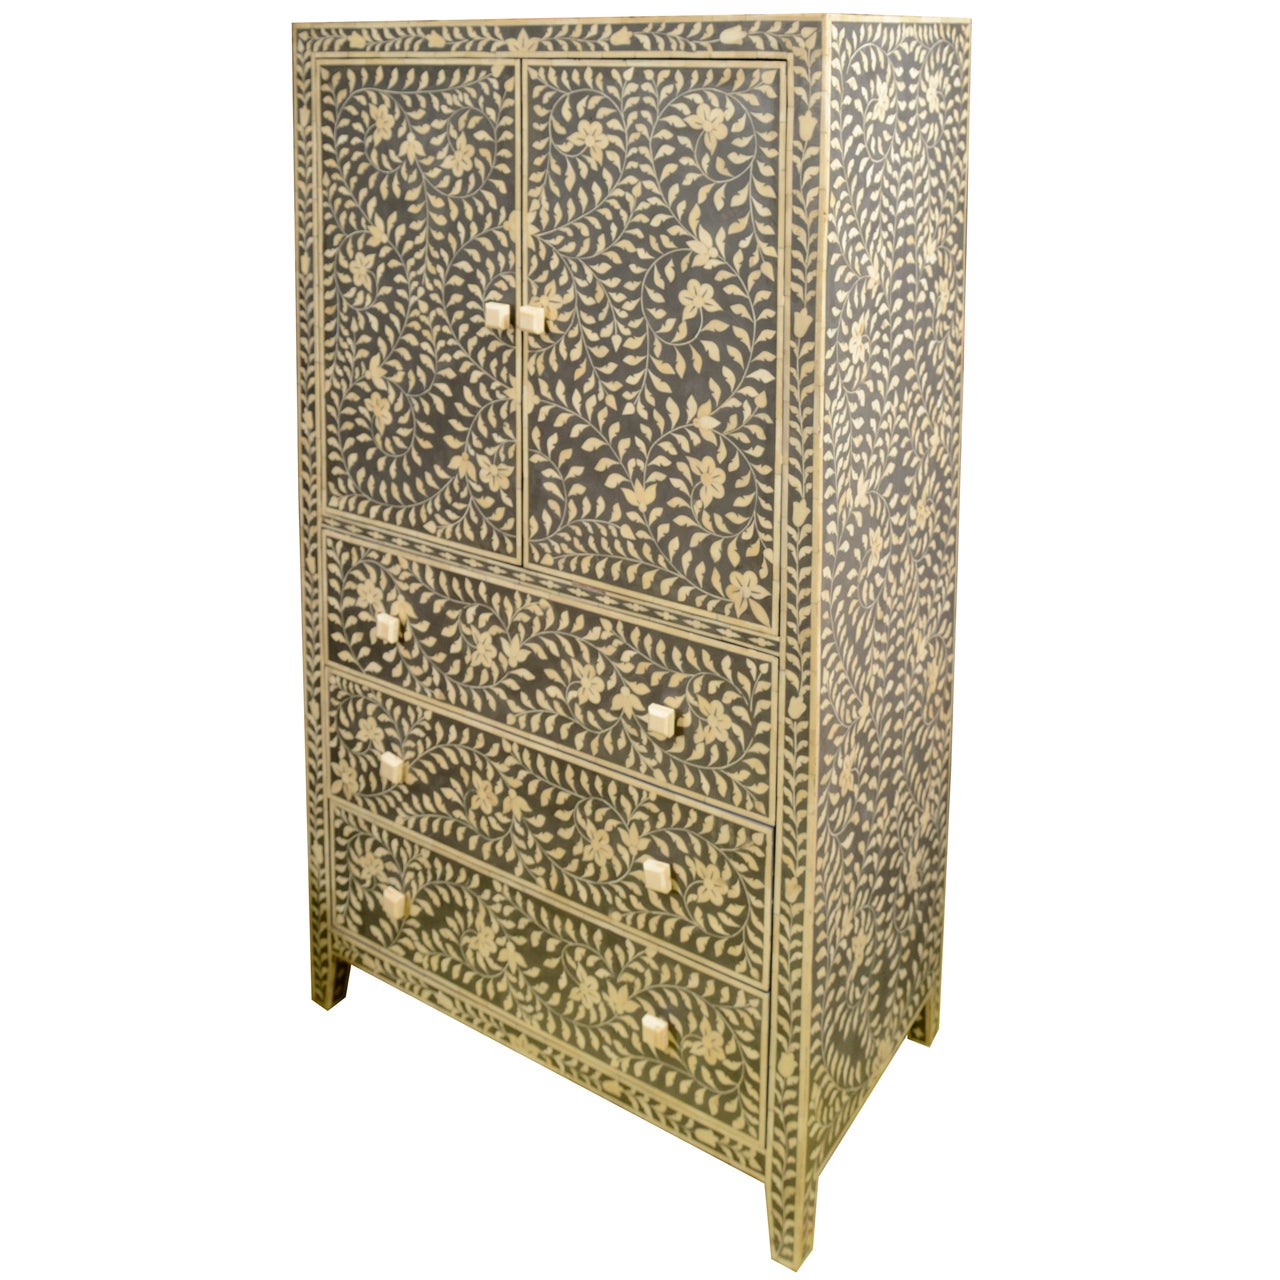 Indian Cabinet with Inlaid Grey Bone, Floral Design